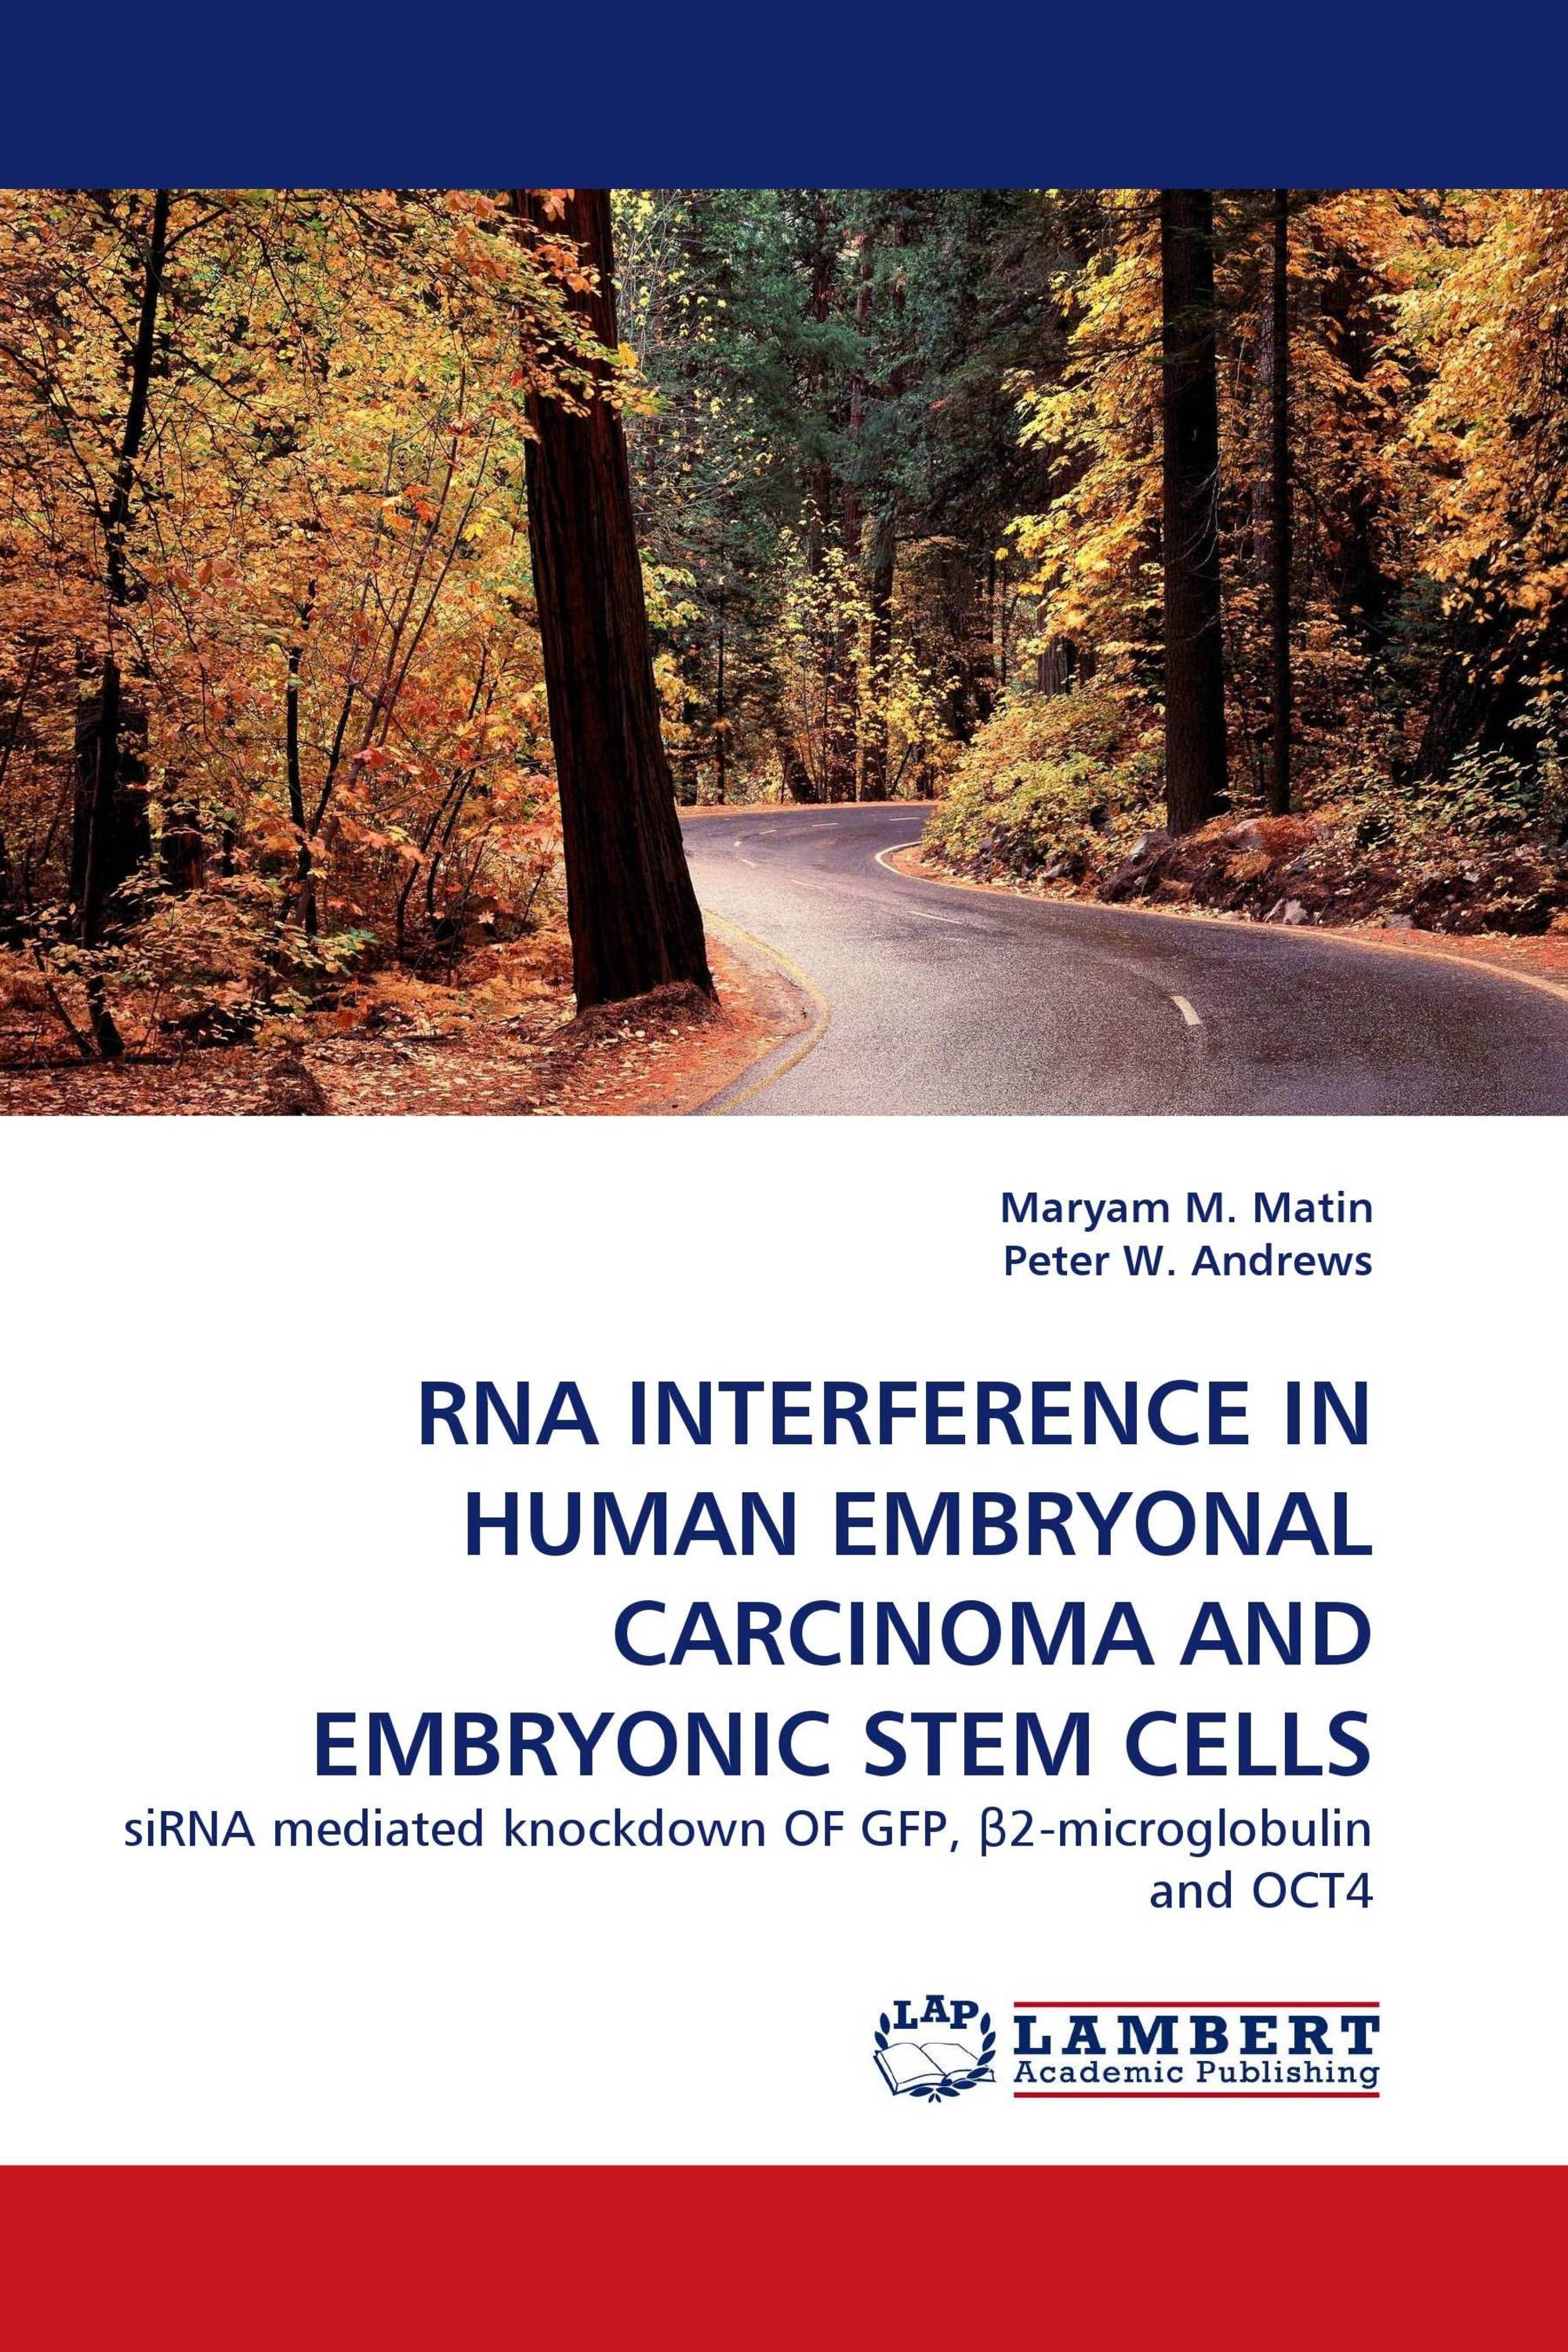 RNA INTERFERENCE IN HUMAN EMBRYONAL CARCINOMA AND EMBRYONIC STEM CELLS